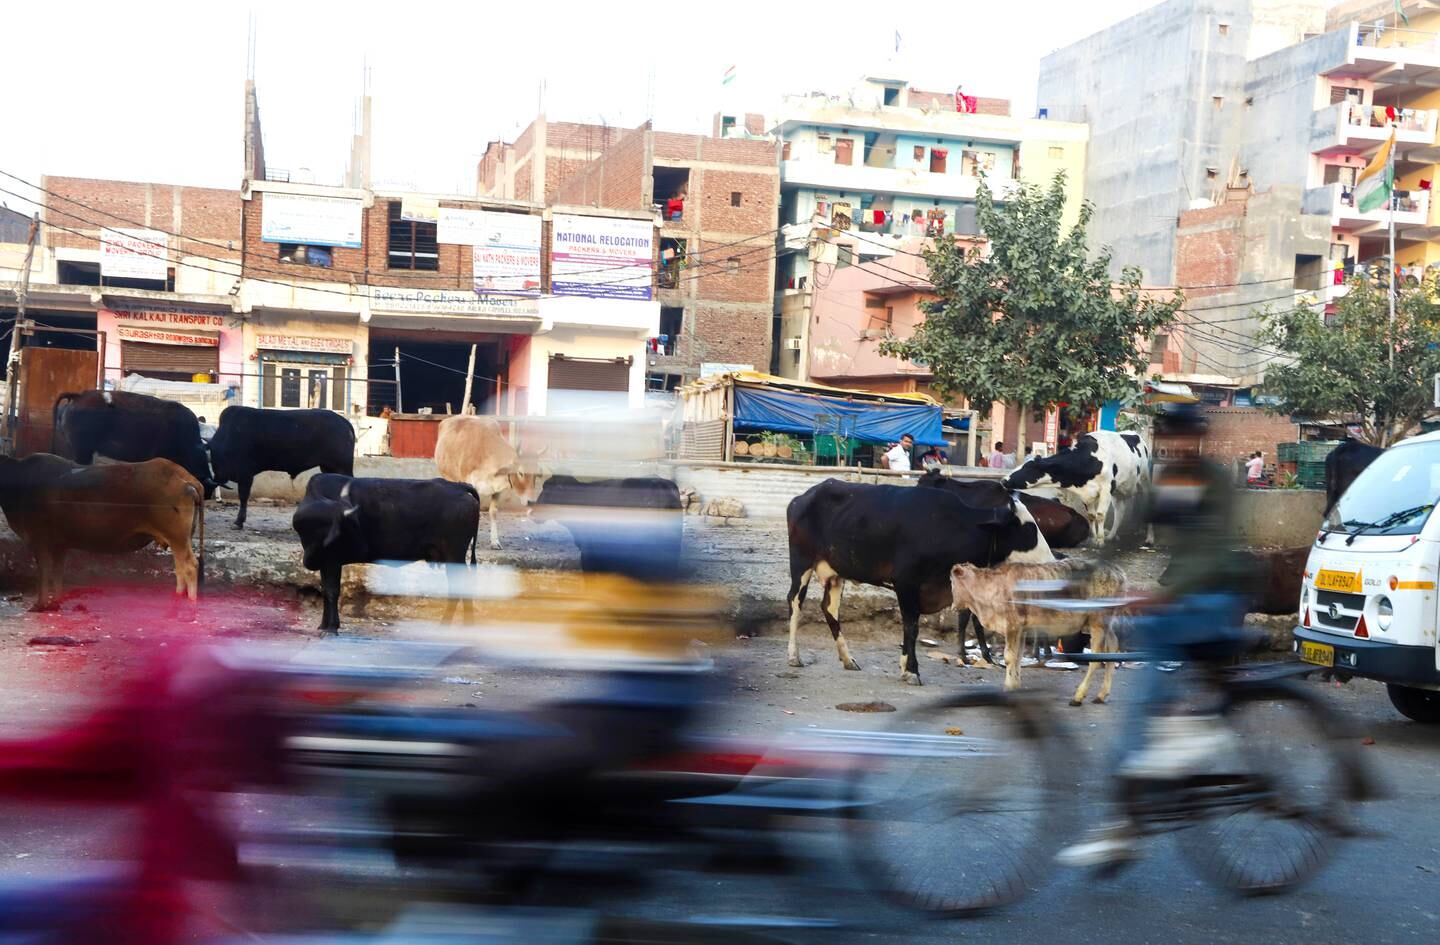 Cows stands along a road on Feb 25, 2022 in Noida, Uttar Pradesh, IndiaWith stray cattle emerging as a major poll issue in Uttar Pradesh, Prime Minister Narendra Modi recently said a new policy will be introduced to tackle it after election results, adding that income can be made from the dung of animals. Vijay Pandey for The National